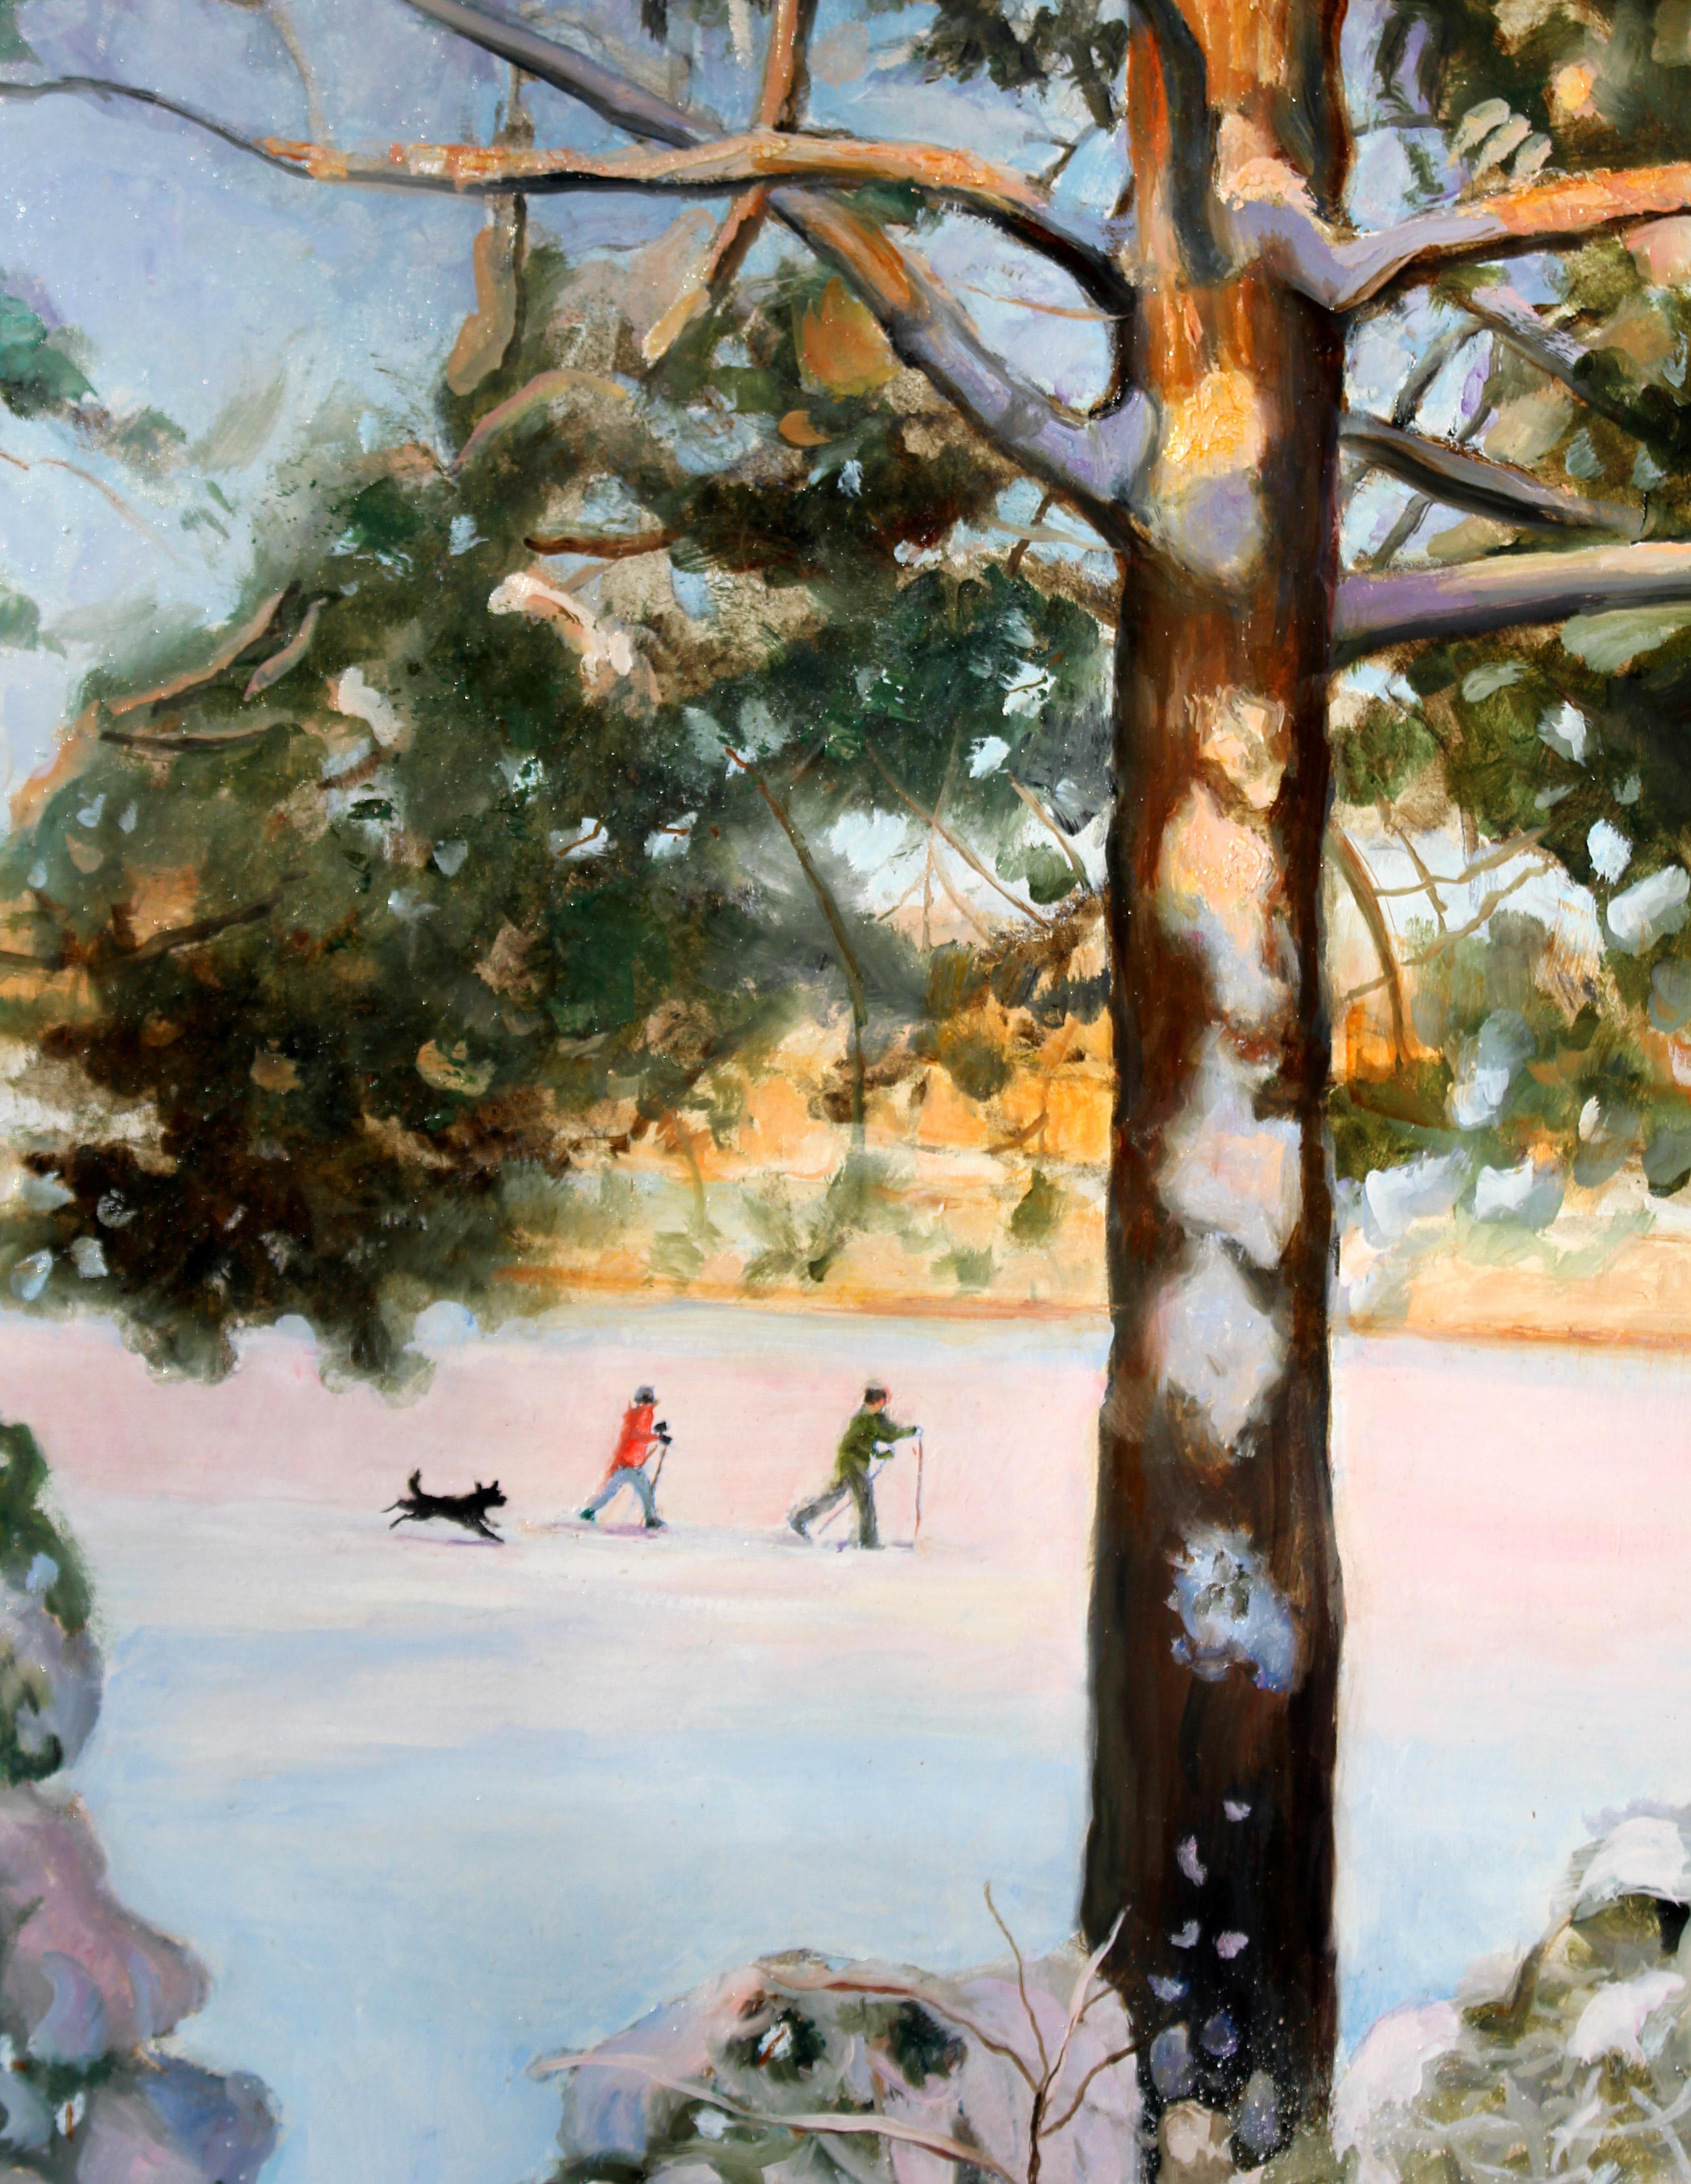 Beautiful Winter Landscape with Cross-Country Skiers and Dog Leaving Snow Tracks - Painting by Beth Carlson